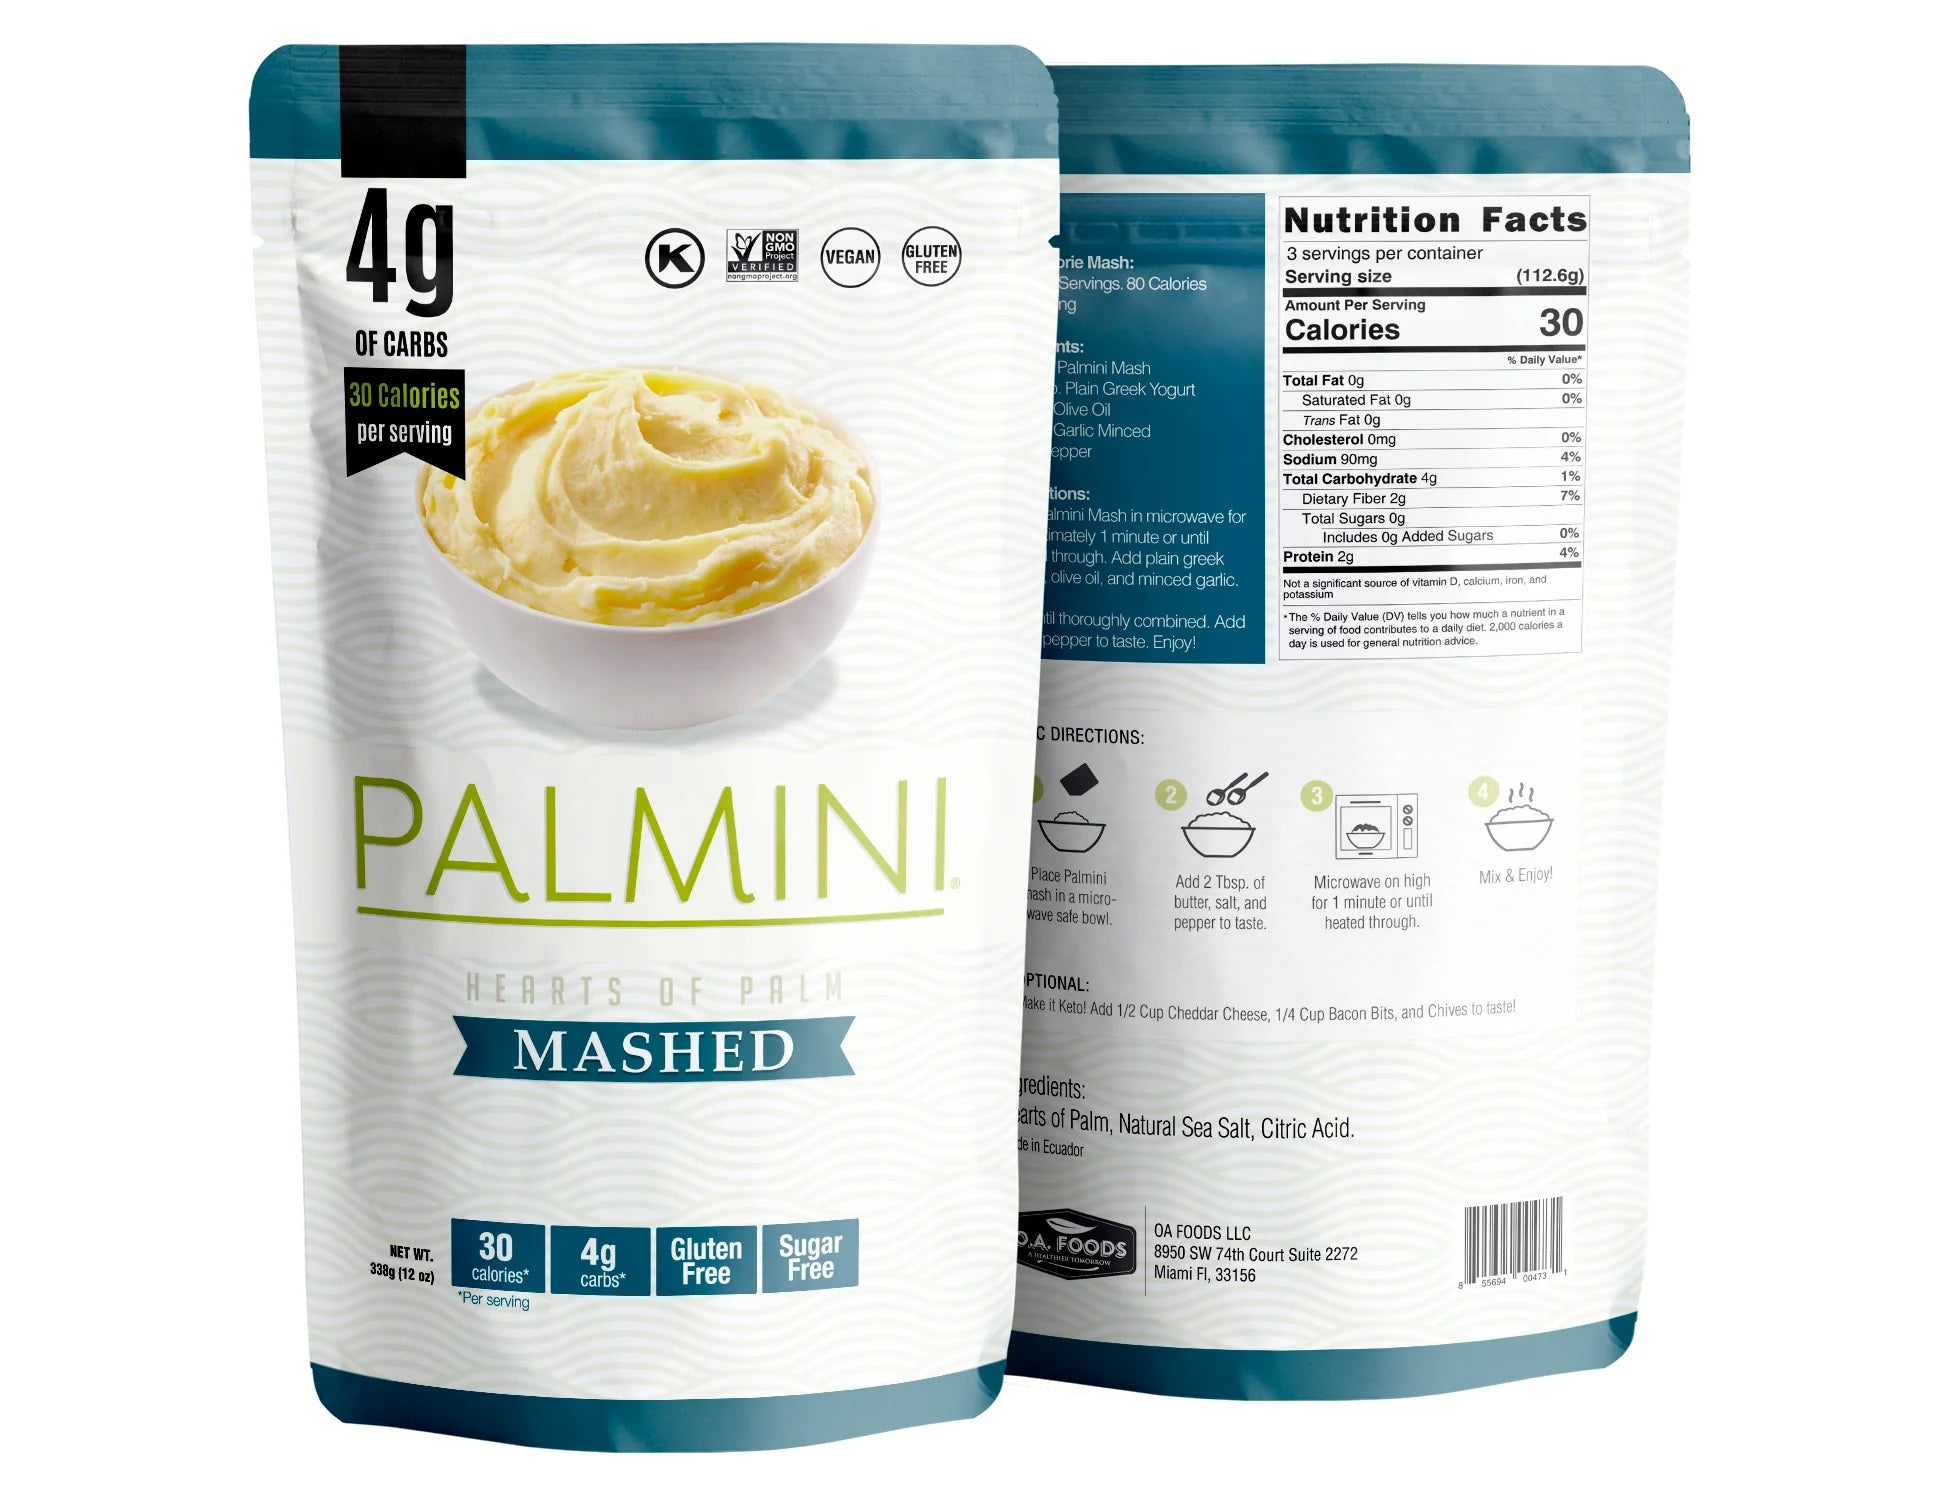 Palmini Heart of Palm Pasta Mashed / 338g